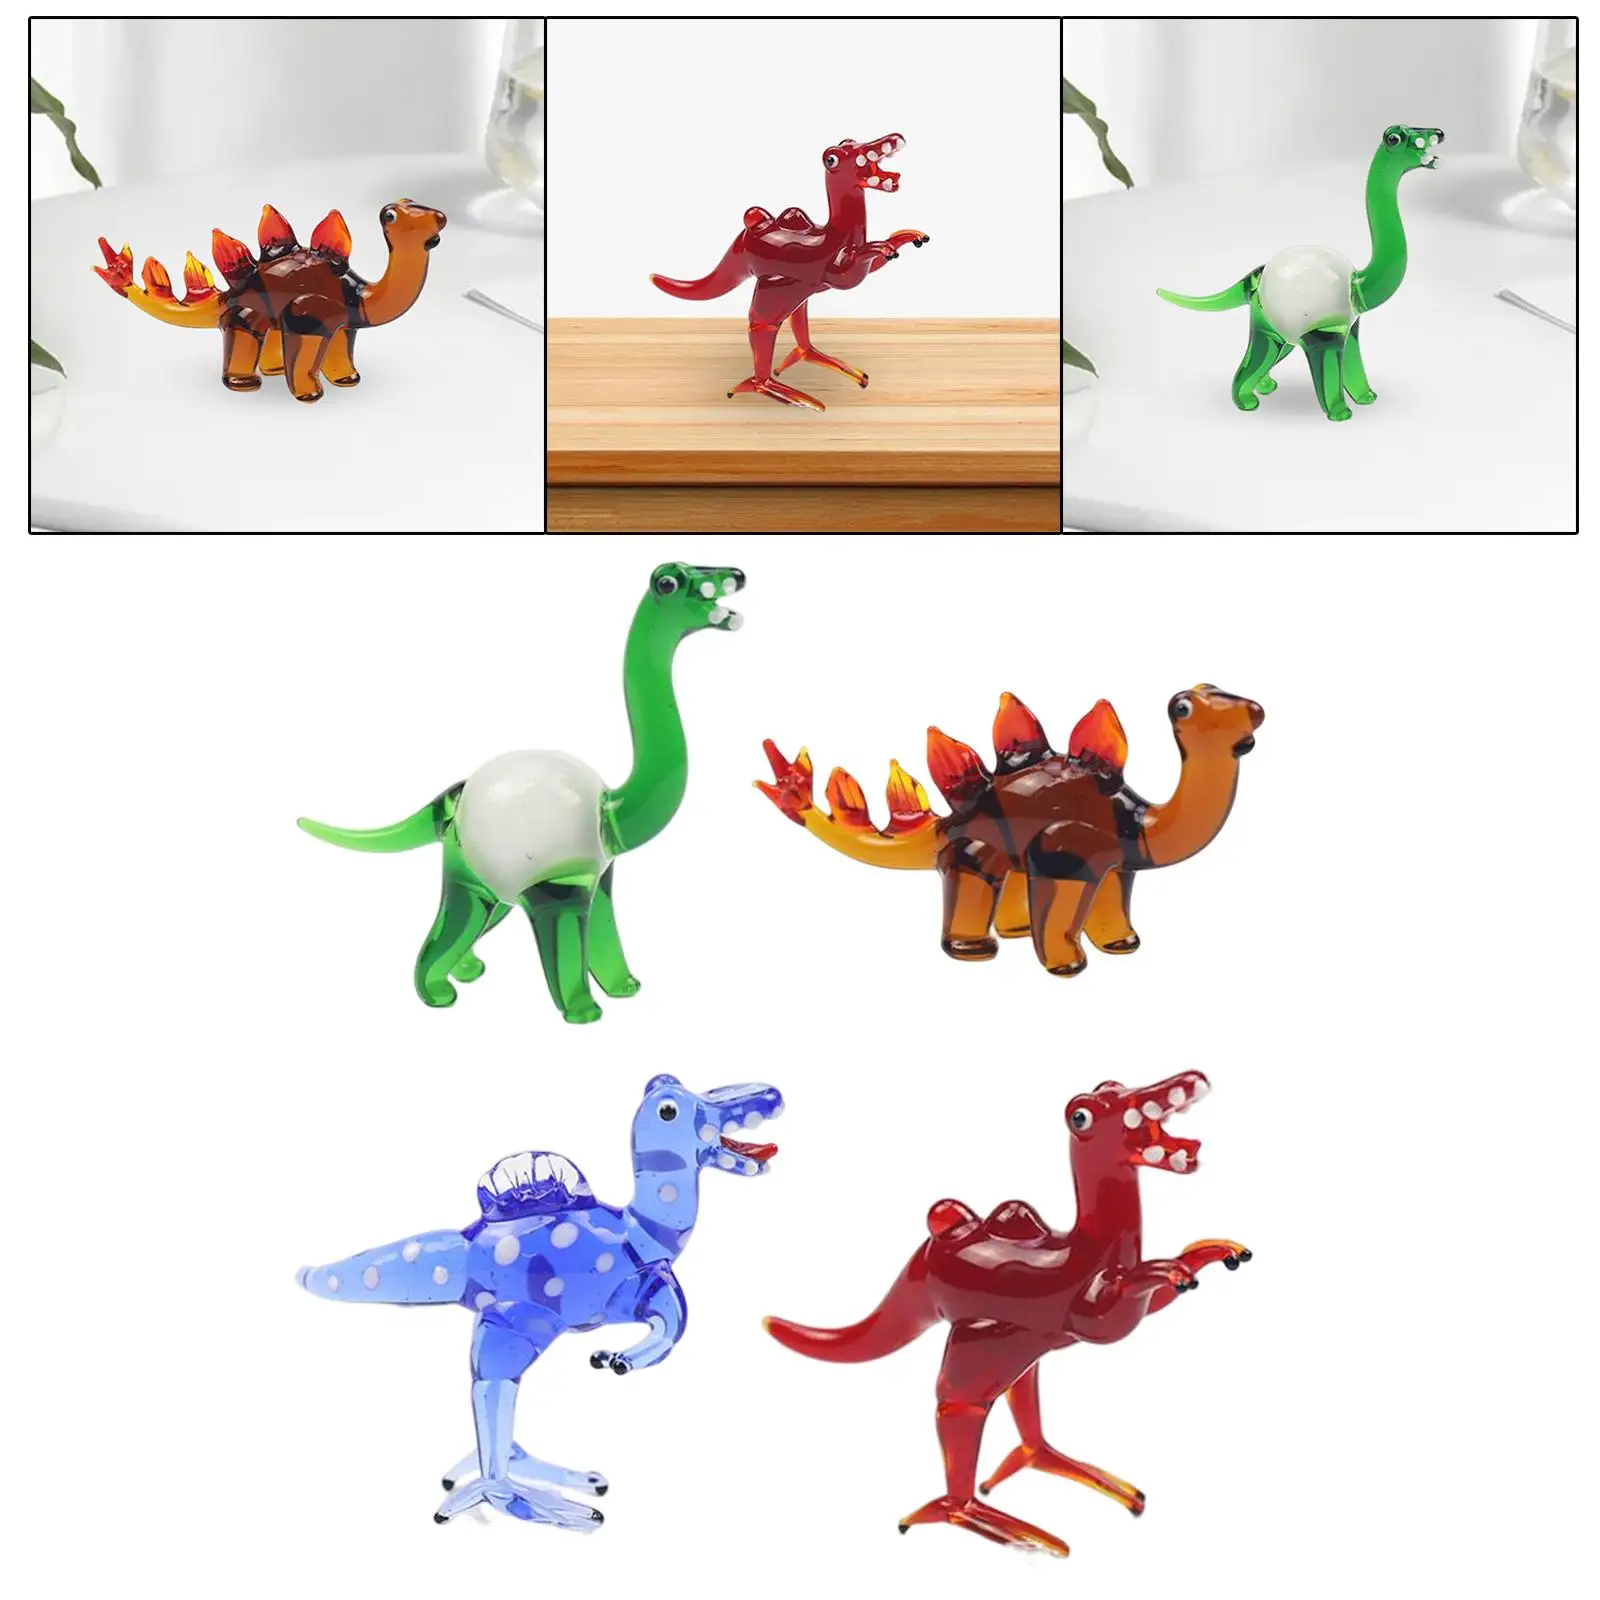 Glass Dinosaur Tiny Smooth Lines Wide Applications Outdoors Indoors Decoration Mini Figurines Cute Art Craft Room Decor Delicate